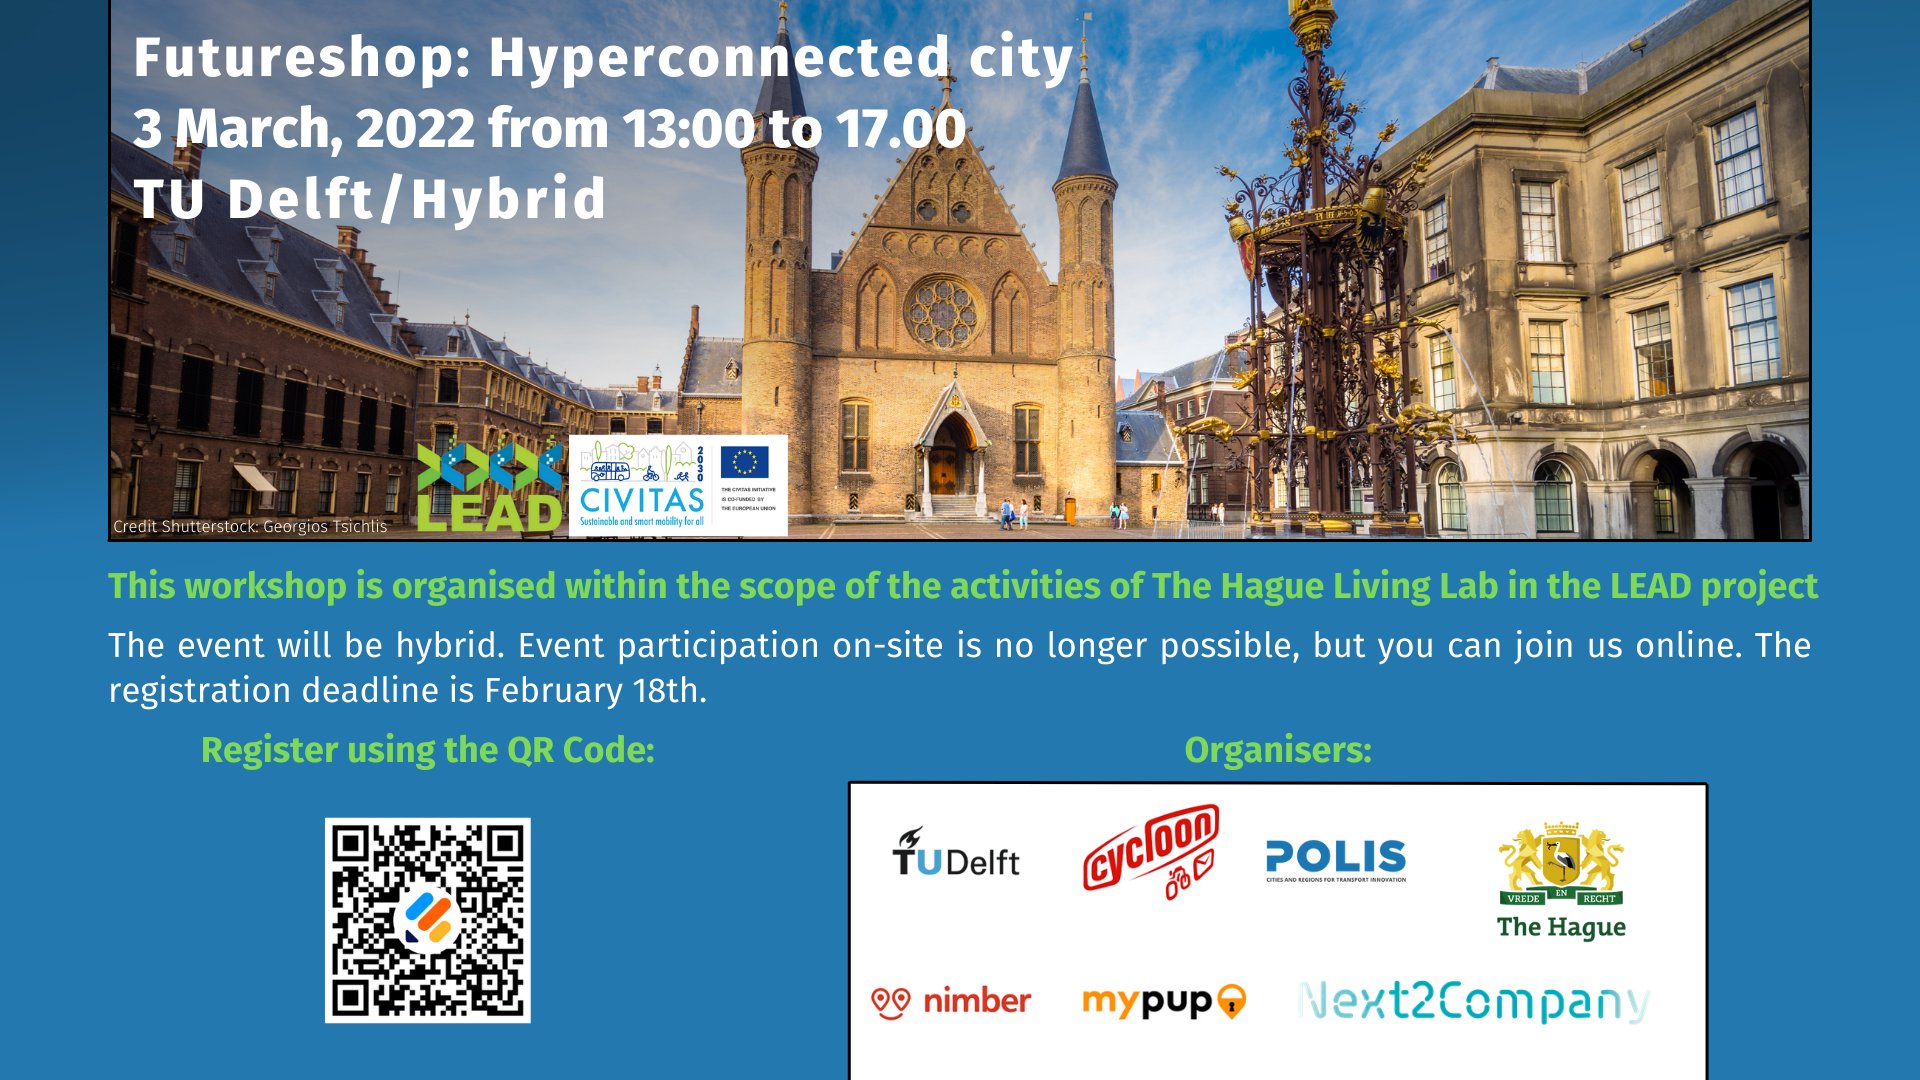 Futureshop: Hyperconnected city